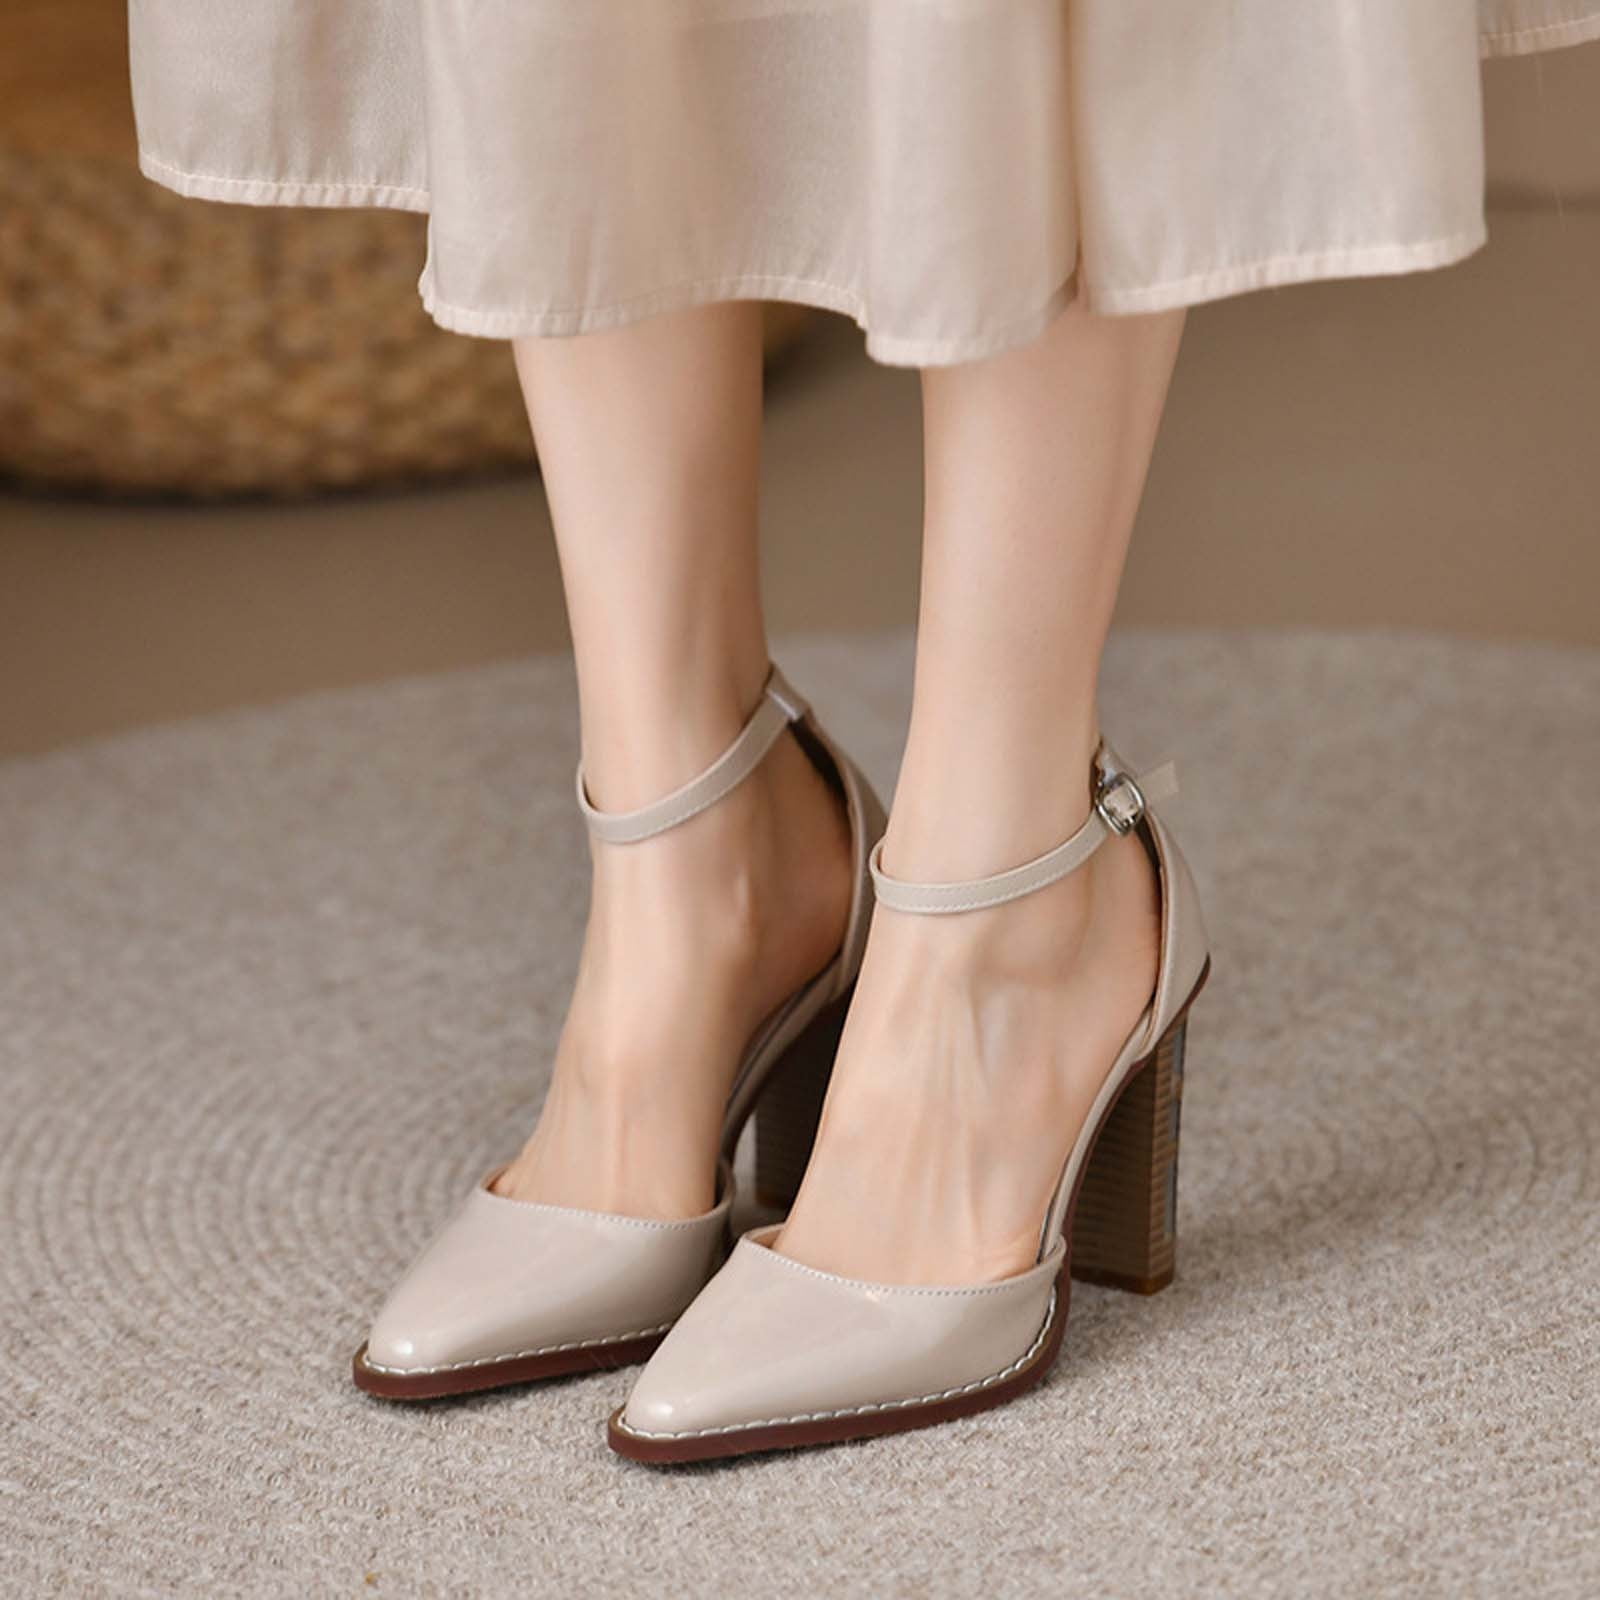 Stretchy Heels|women's 8.5cm High Heels Chunky Pumps - Sexy Pointed Toe  Block Heels